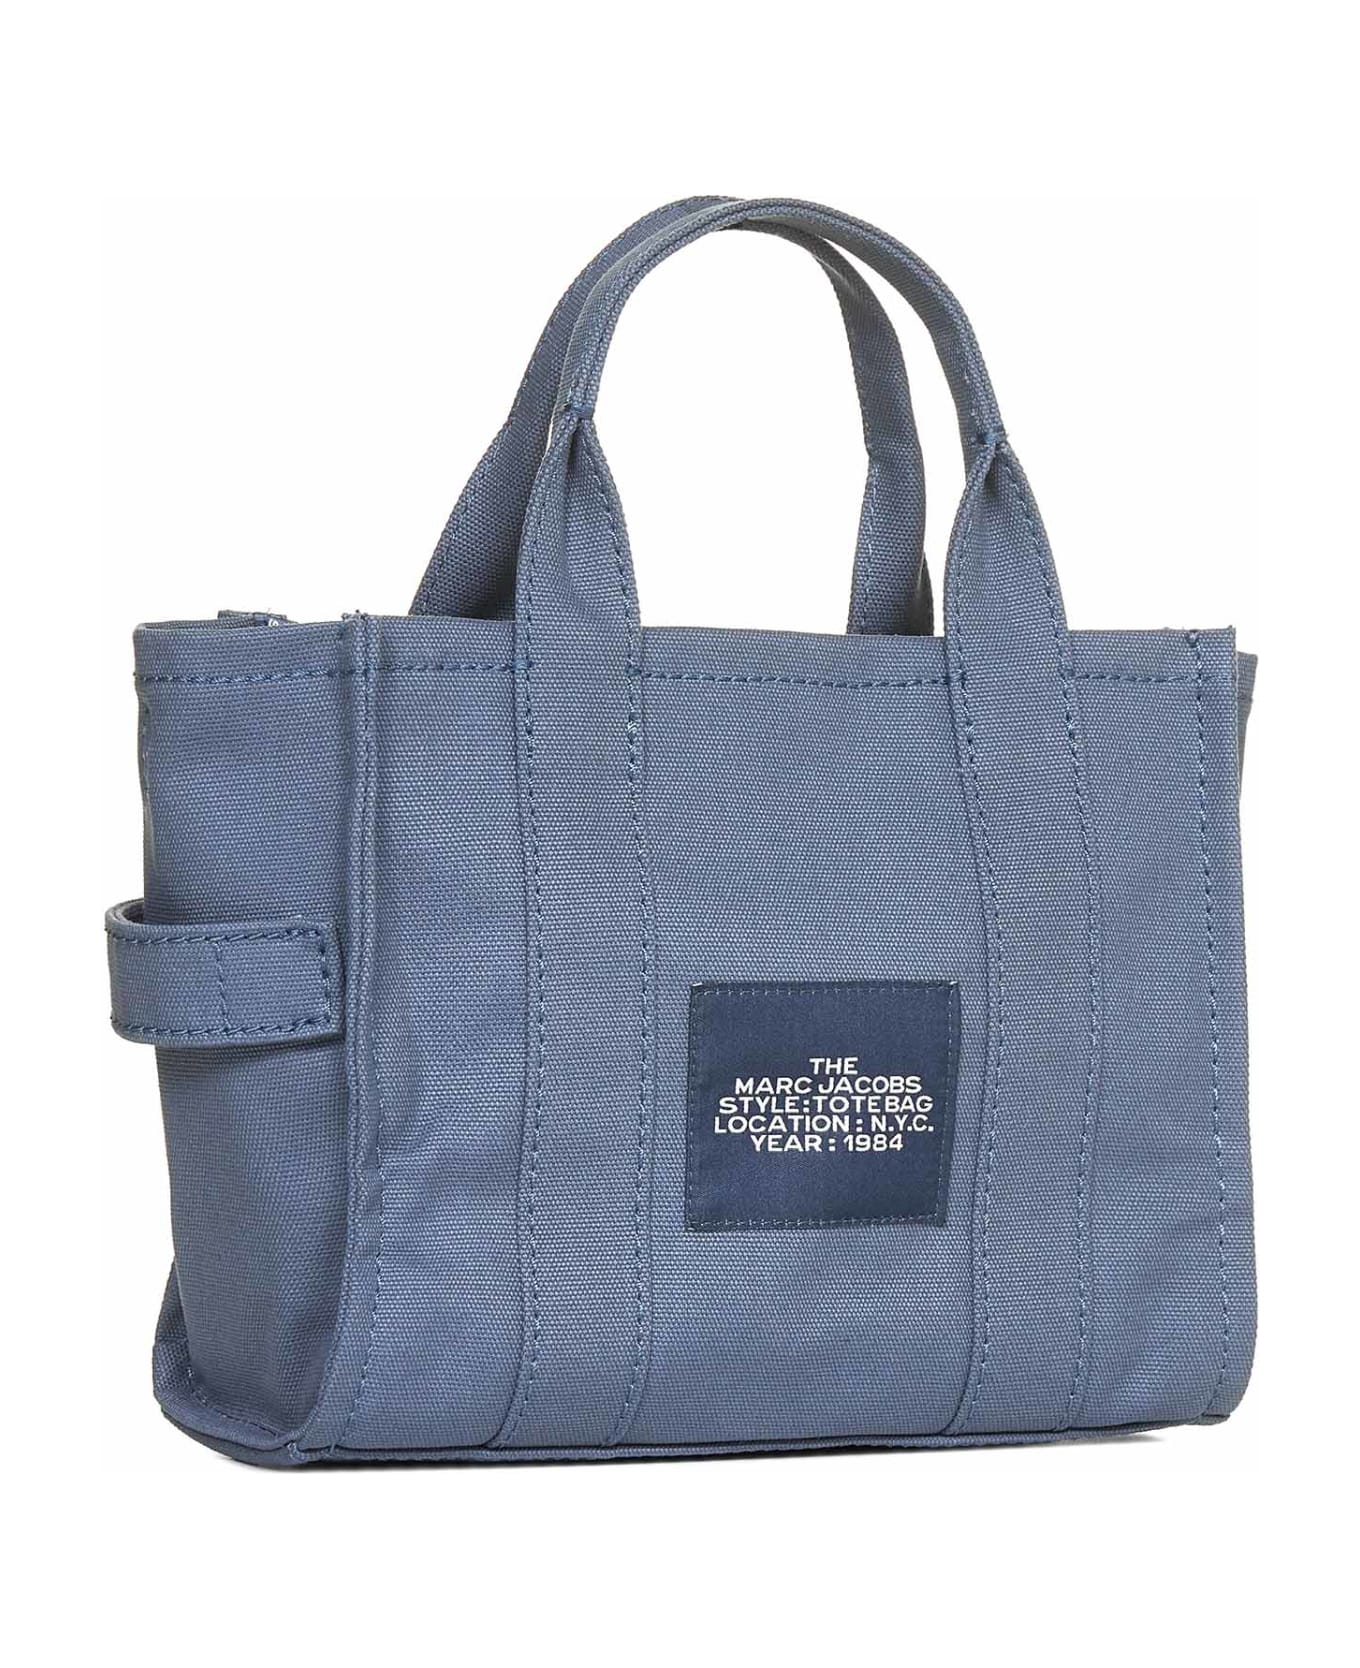 Marc Jacobs The Tote Small Bag - Blue Shadow